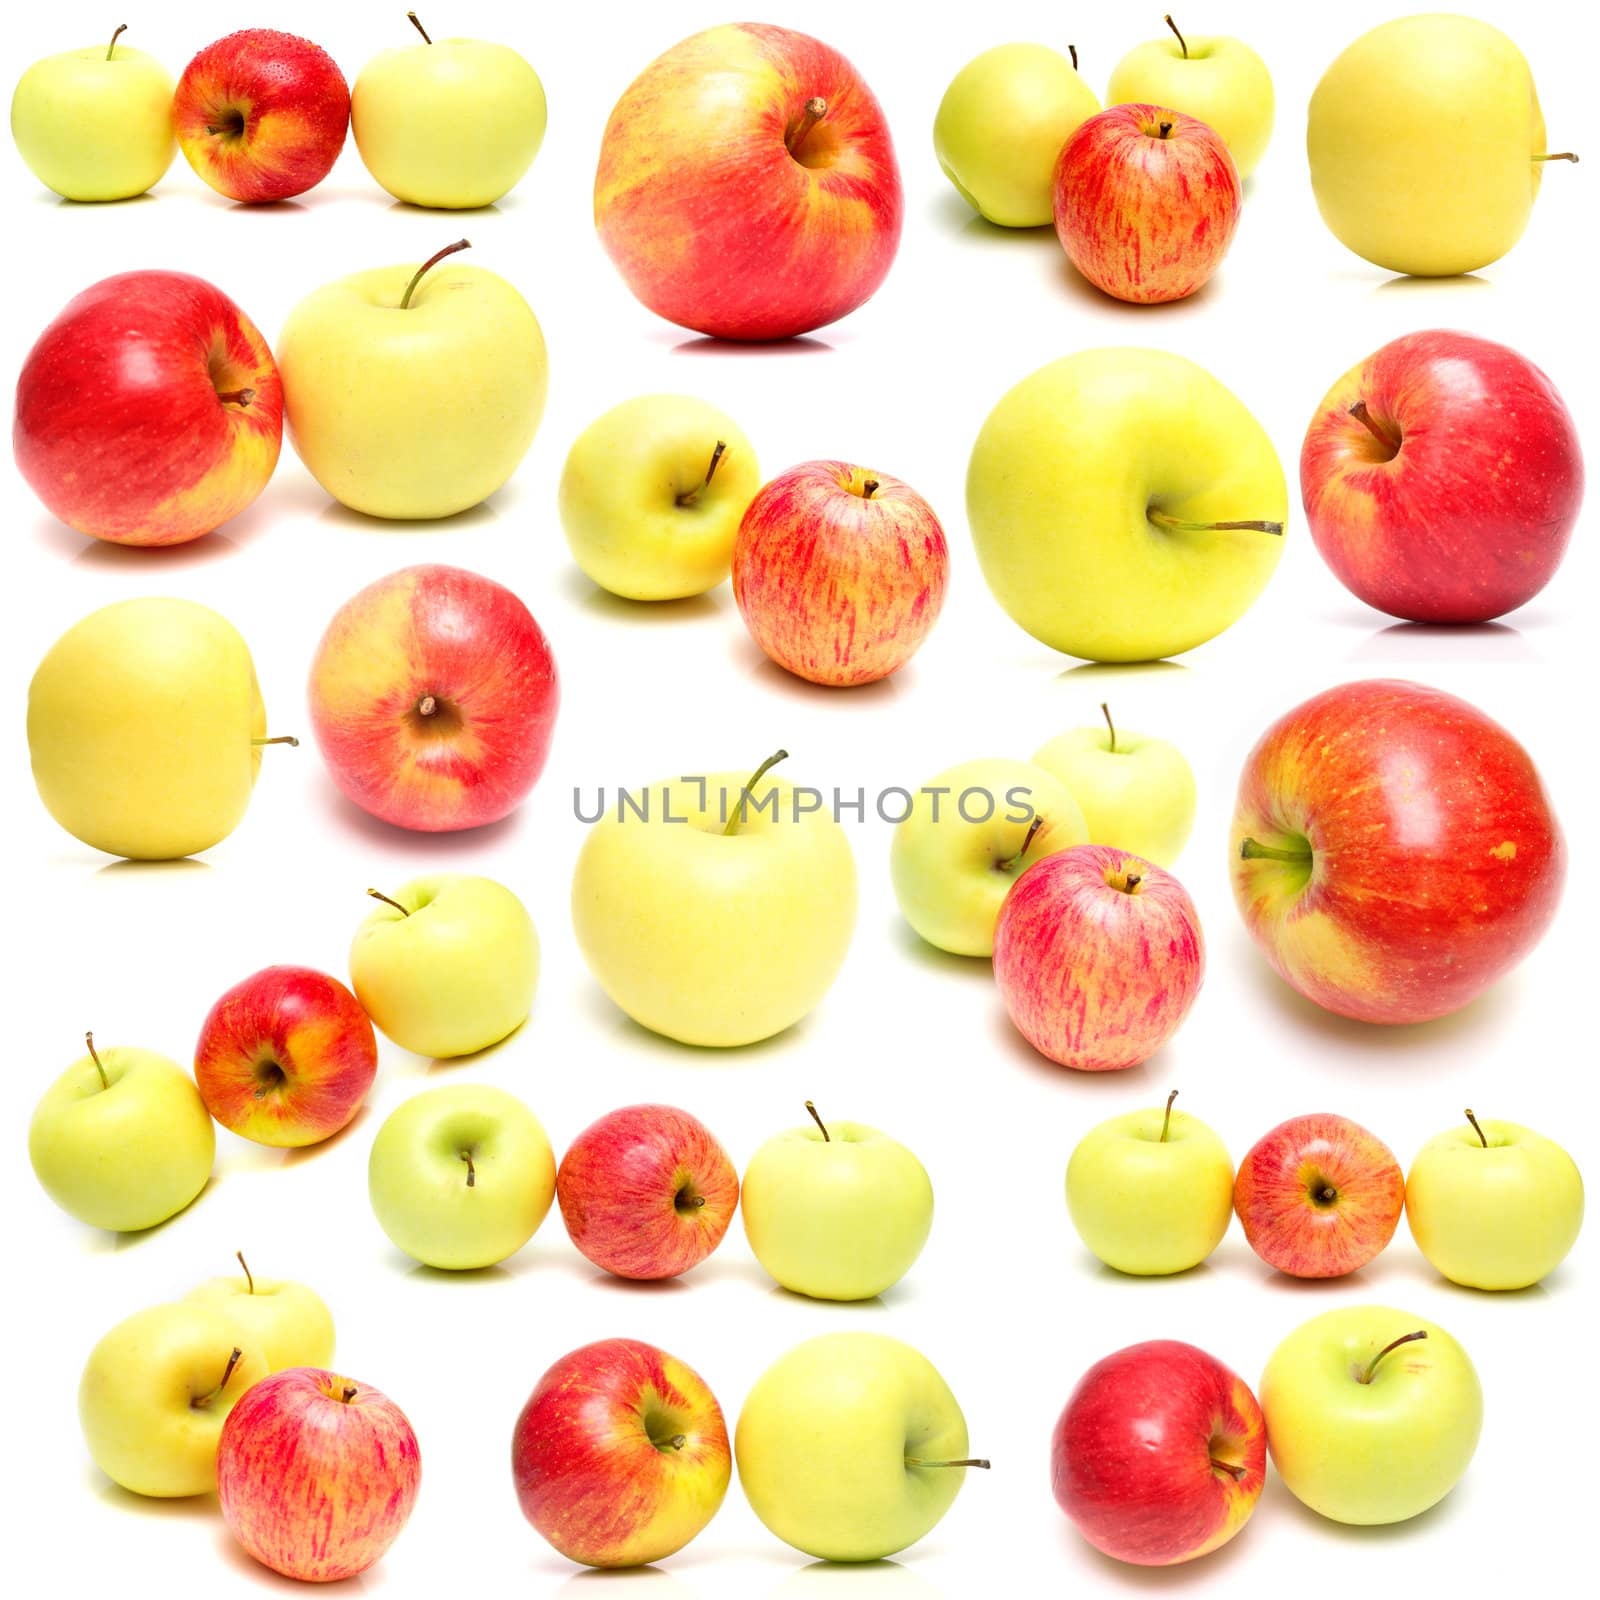 red and yellow apples on white background. Isolation. Shallow DOF.